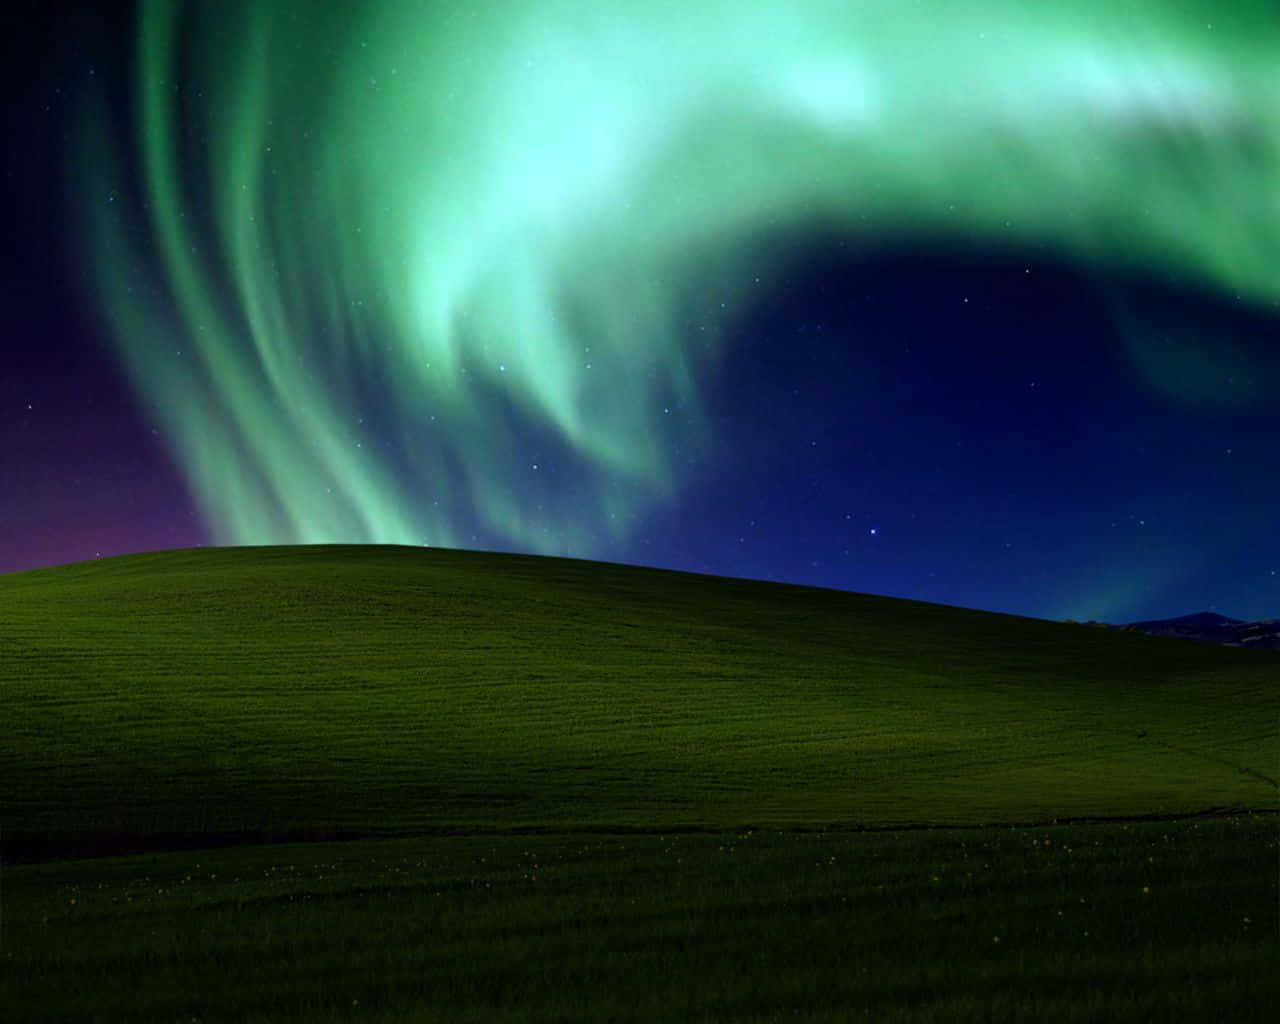 A Green Field With An Aurora Bore In The Sky